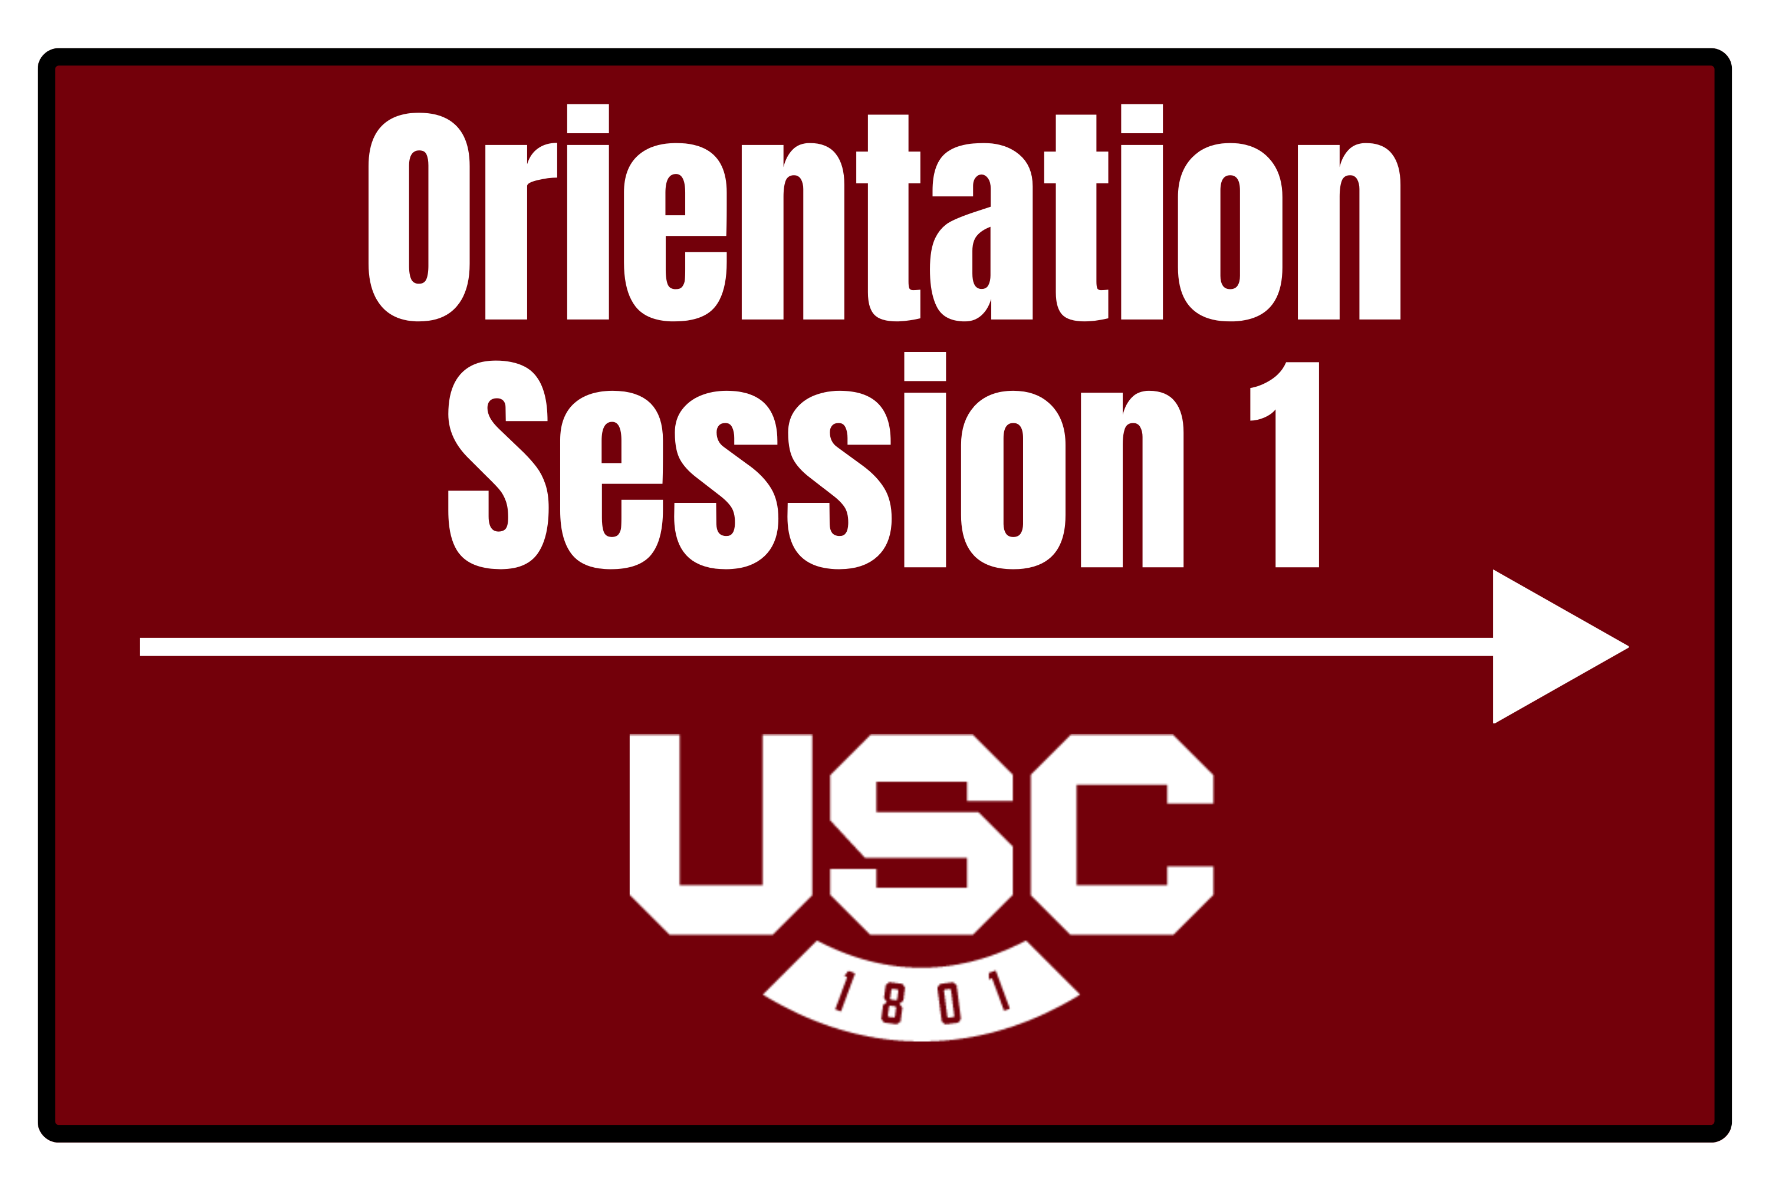 Orientation Session 1: May 28 - 29